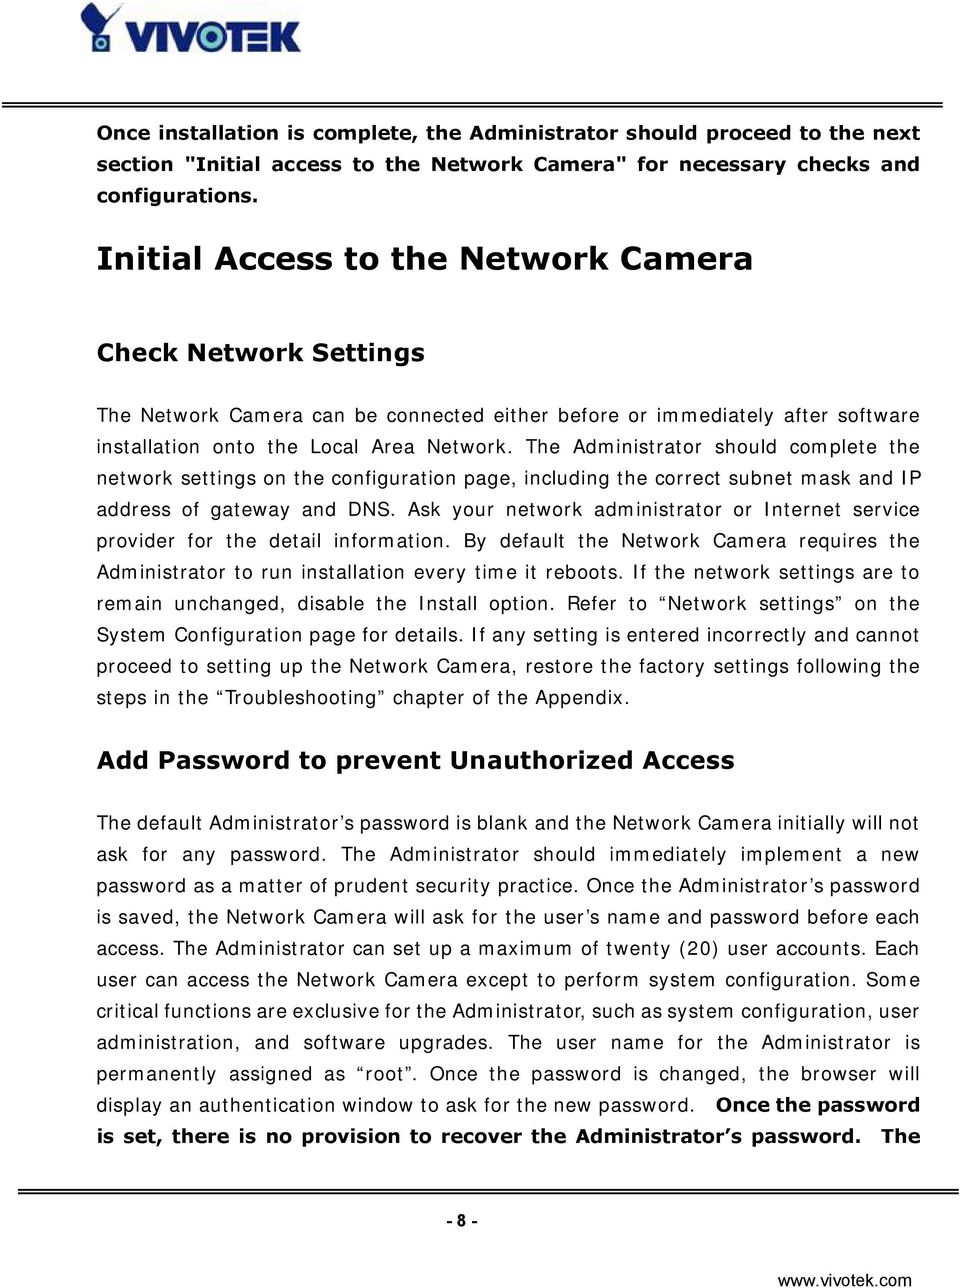 The Administrator should complete the network settings on the configuration page, including the correct subnet mask and IP address of gateway and DNS.